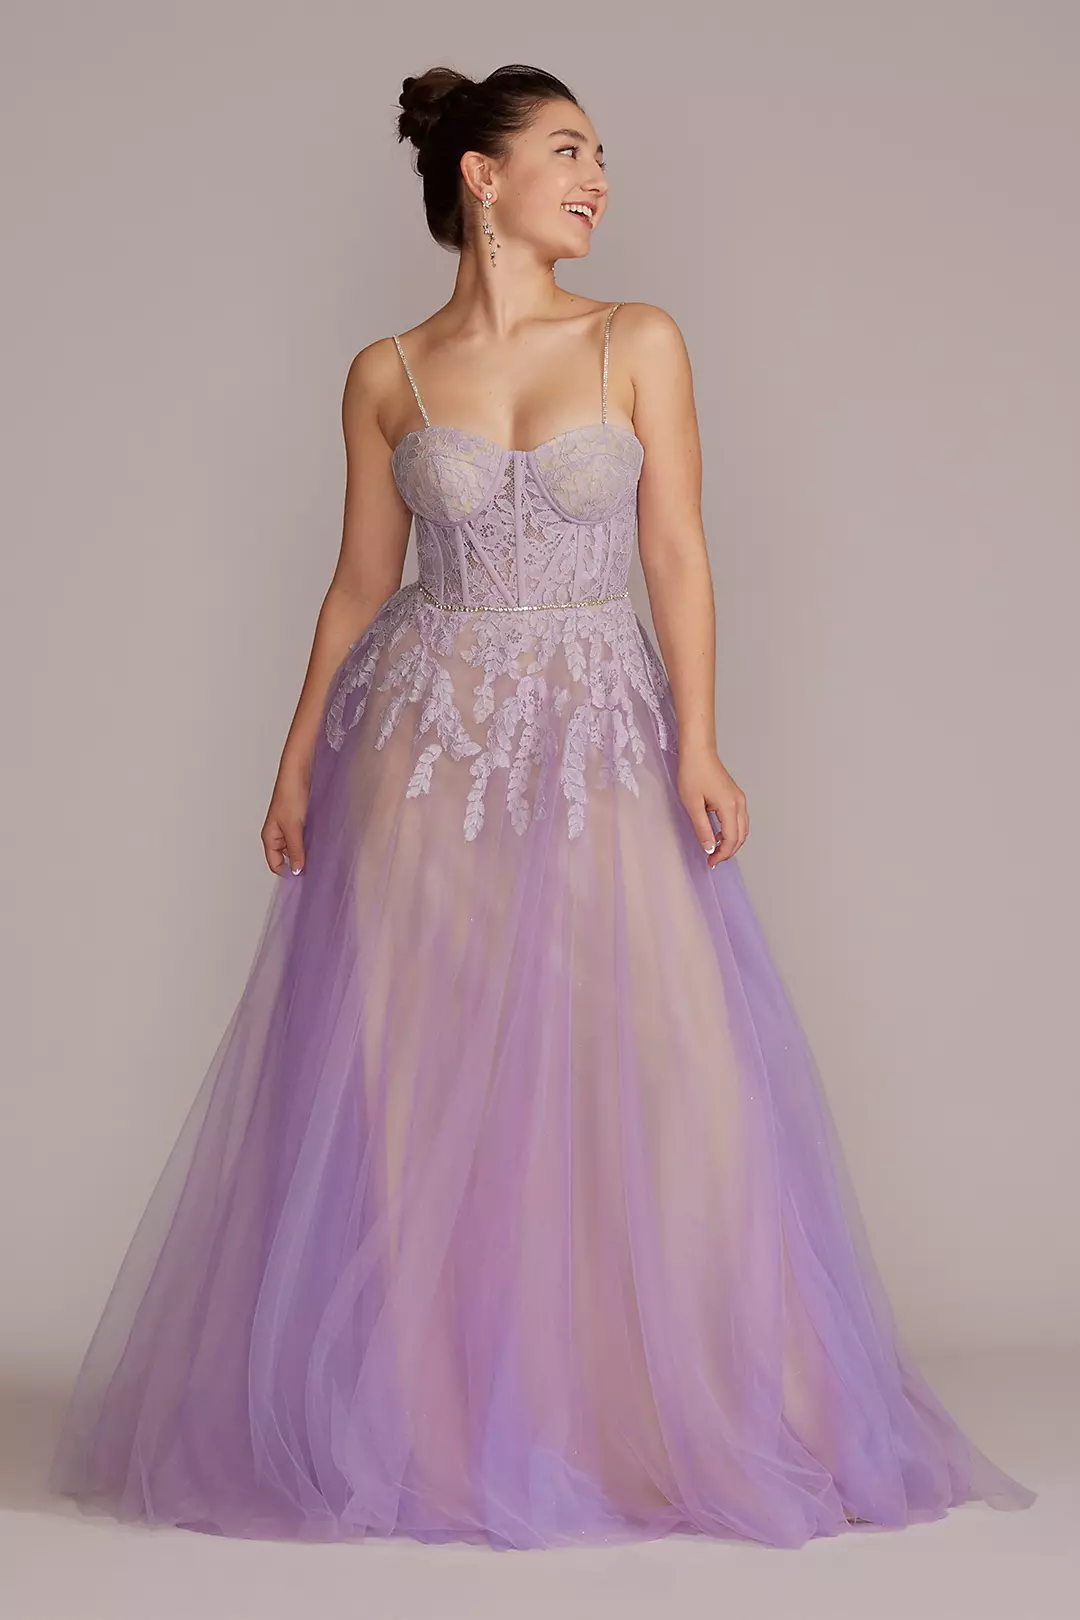 Tulle Ball Gown with Illusion Lace Corset Image